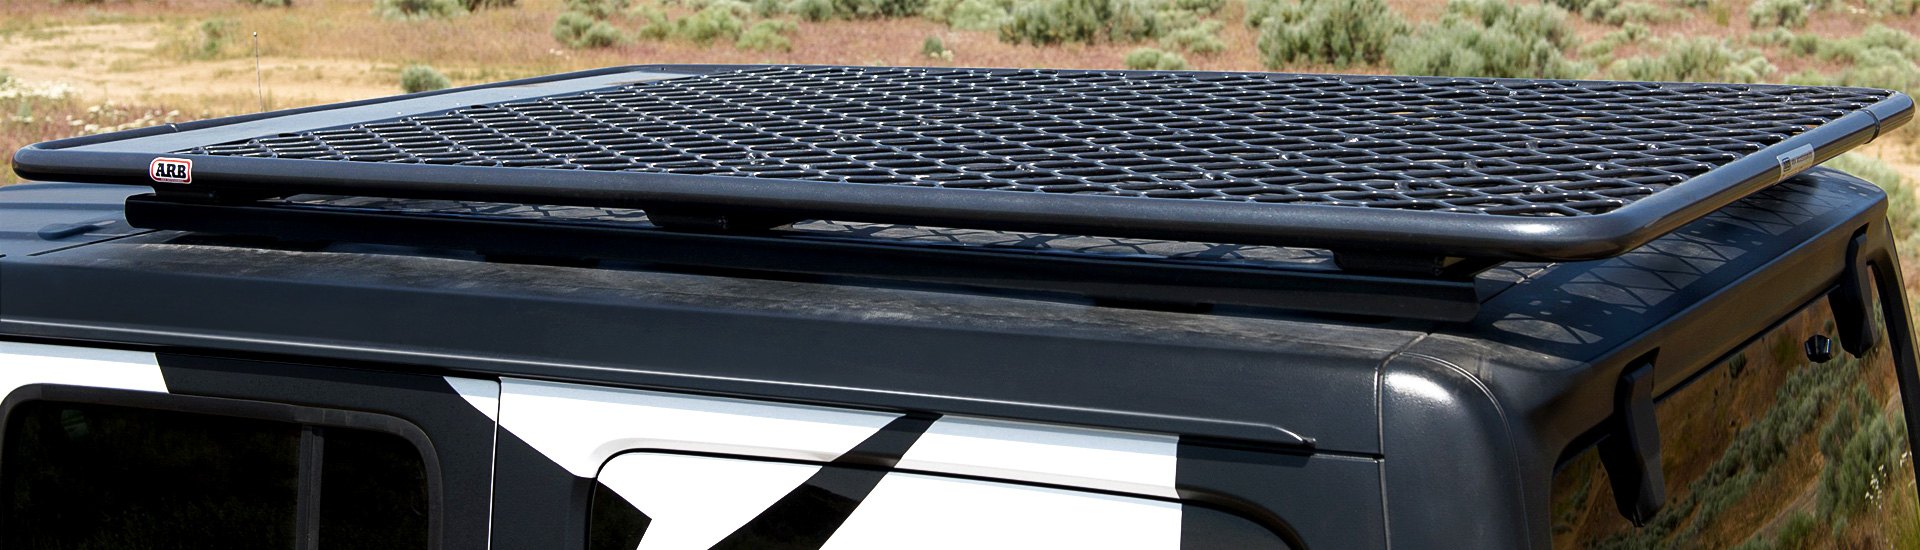 Boost Up Your Jeep’s Versatility With ARB One-Of-A-Kind Alloy Roof Cargo Basket